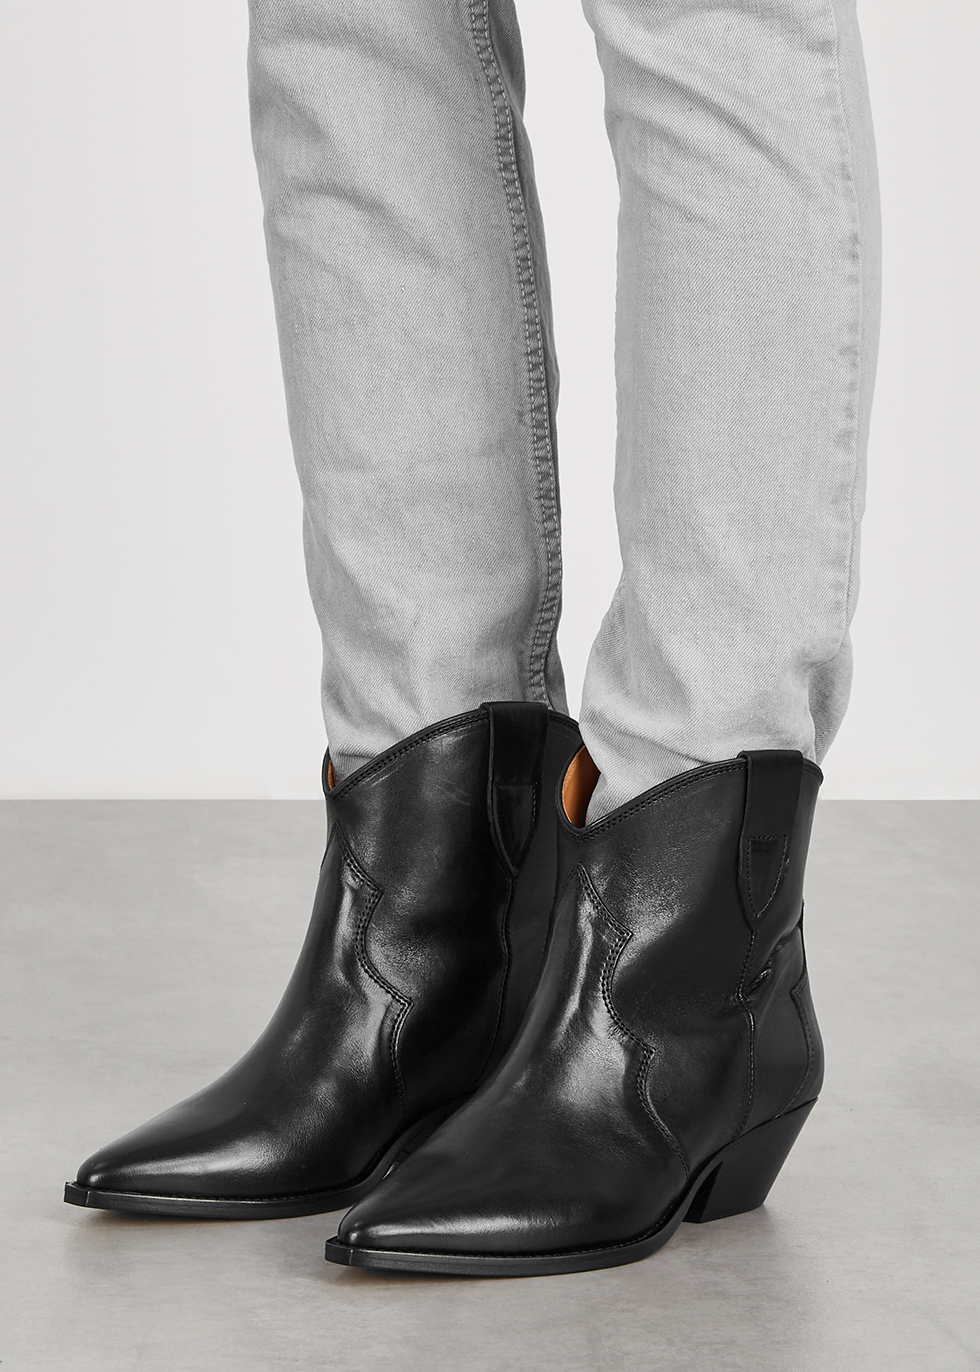 isabel marant leather boots